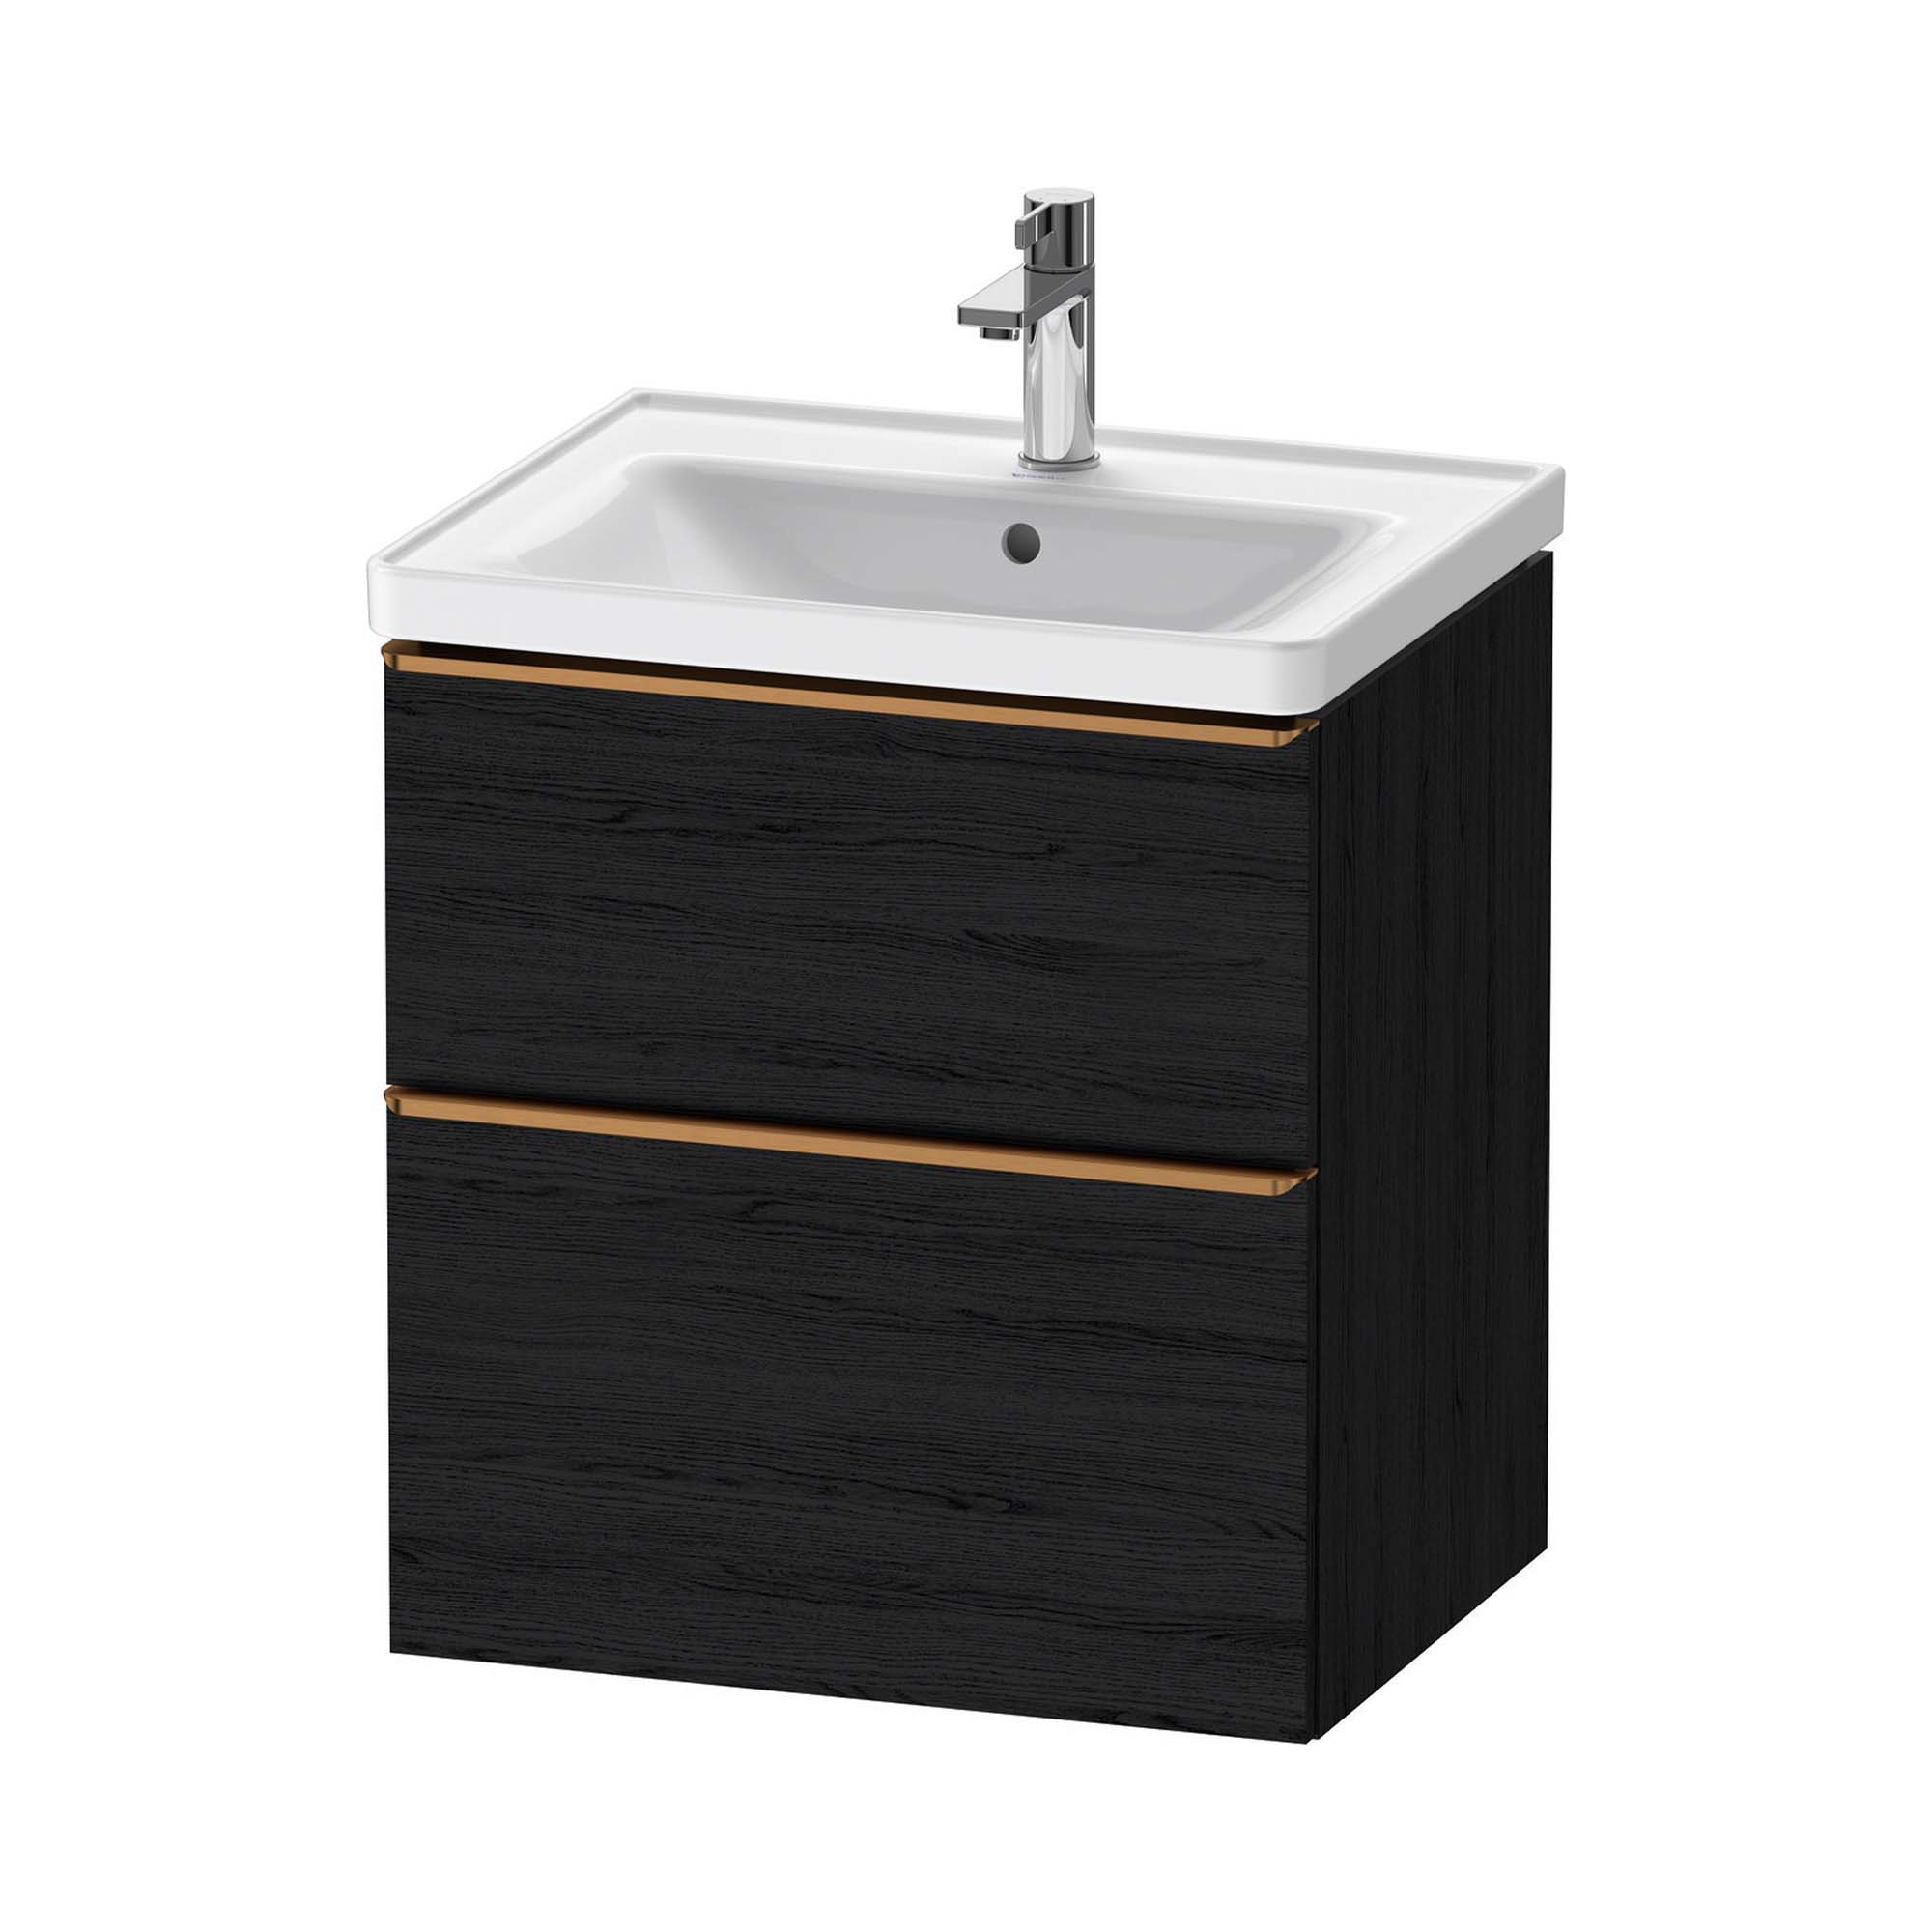 duravit d-neo 600 wall mounted vanity unit with d-neo basin black oak brushed bronze handles